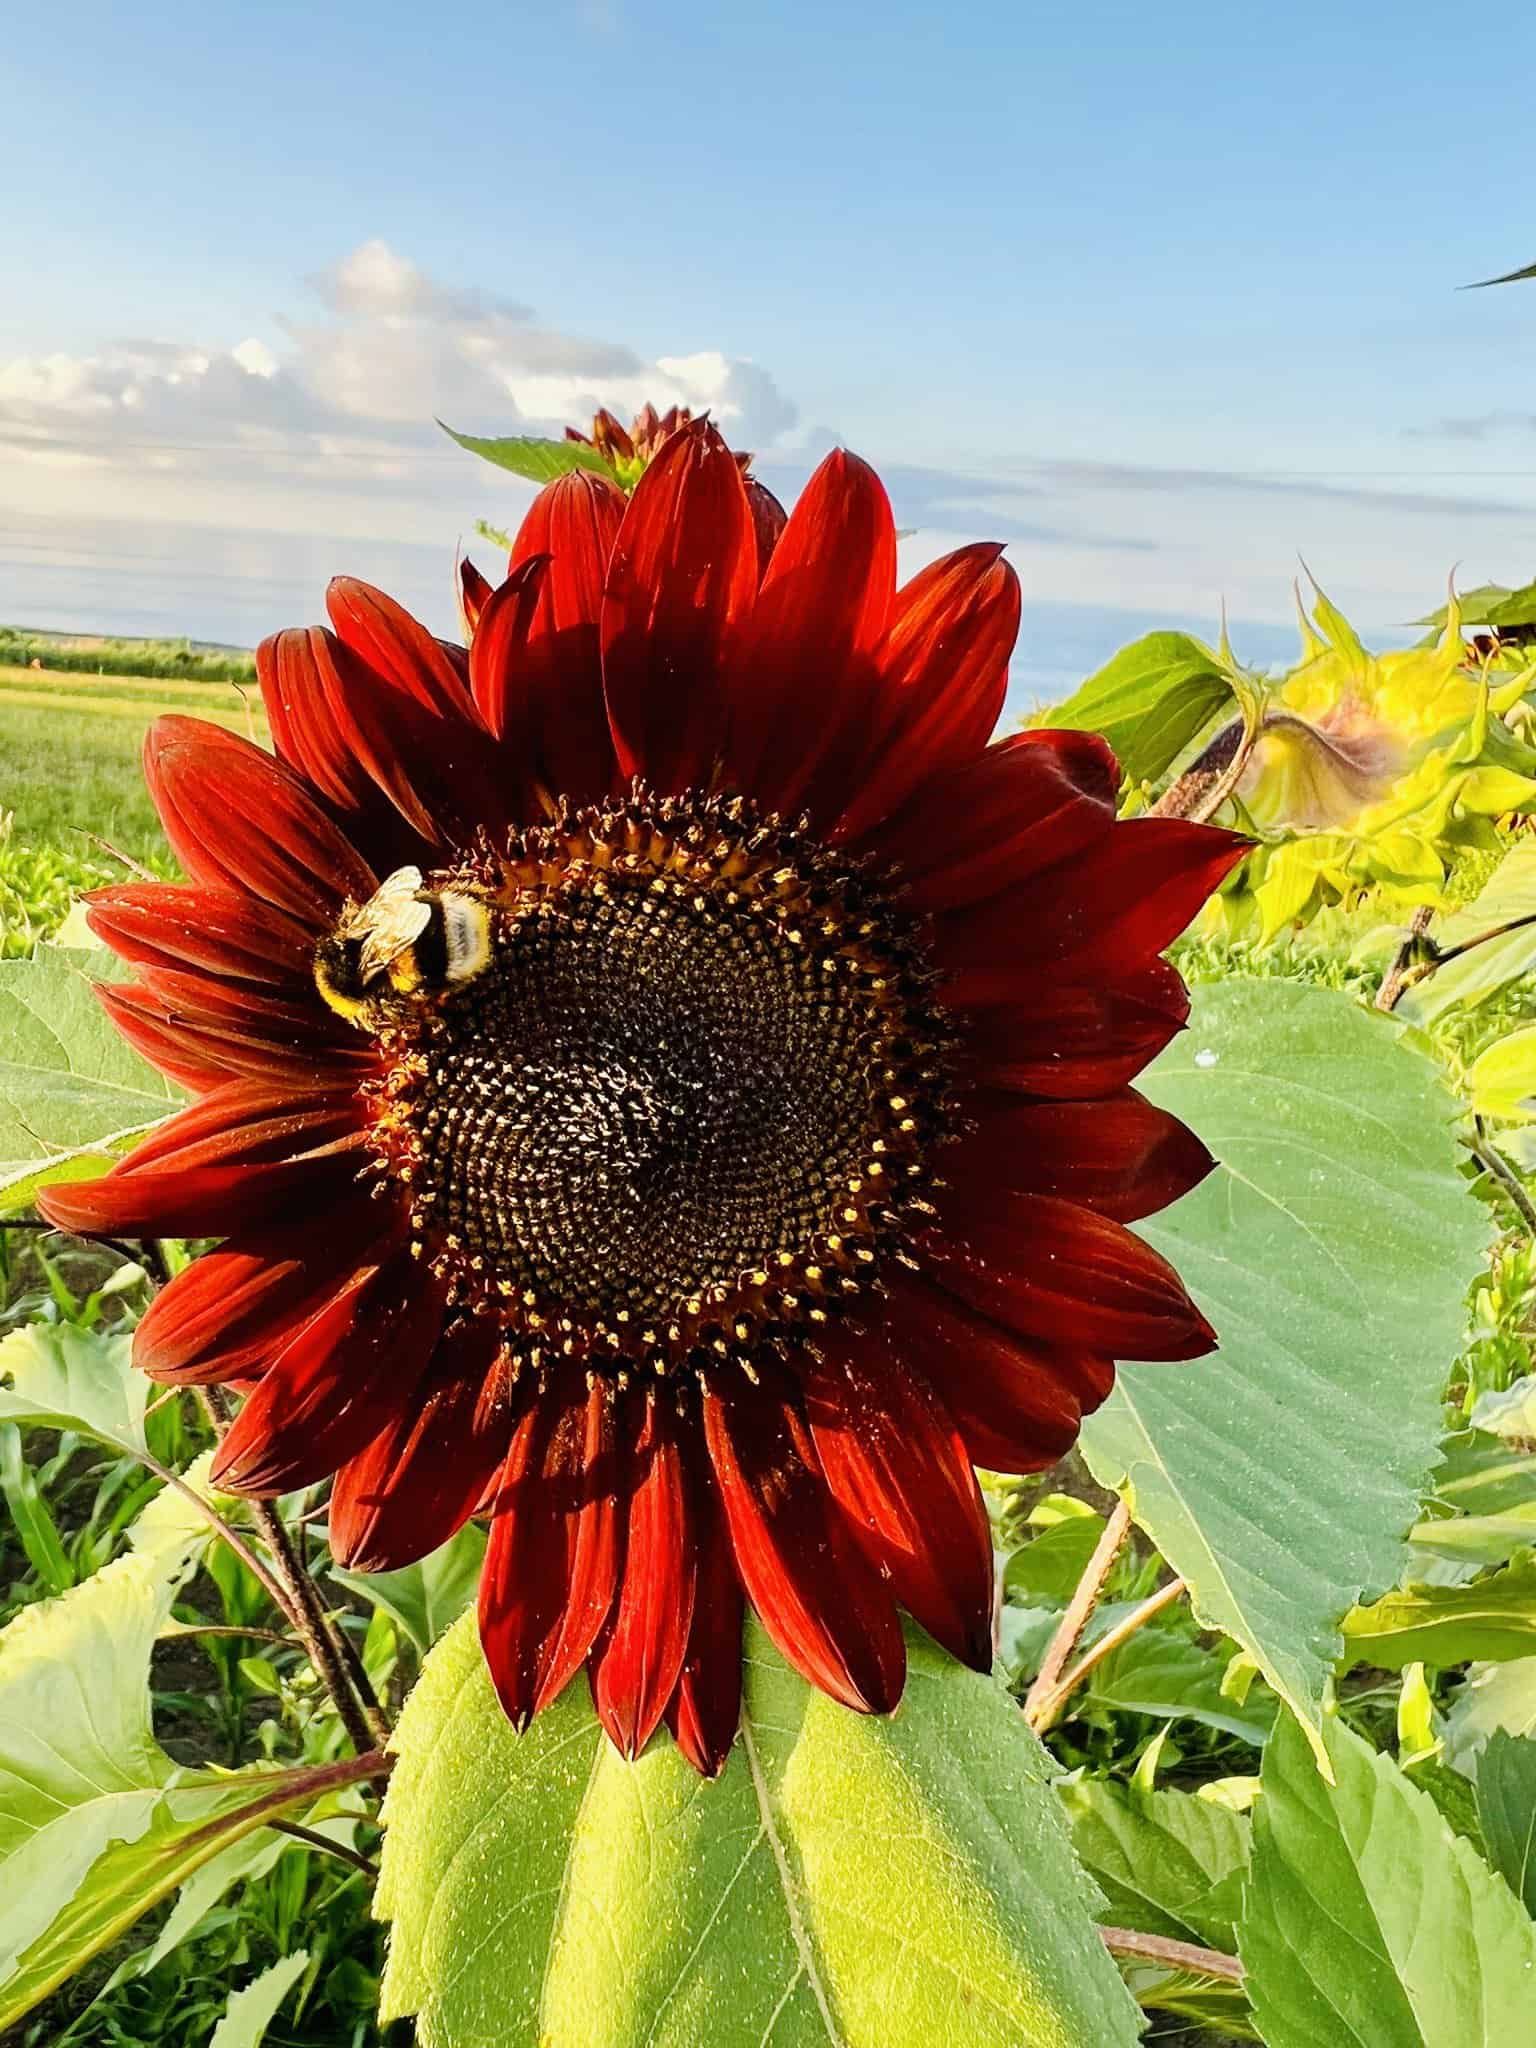 A bee is sitting over the pollens of the red Sunflower.